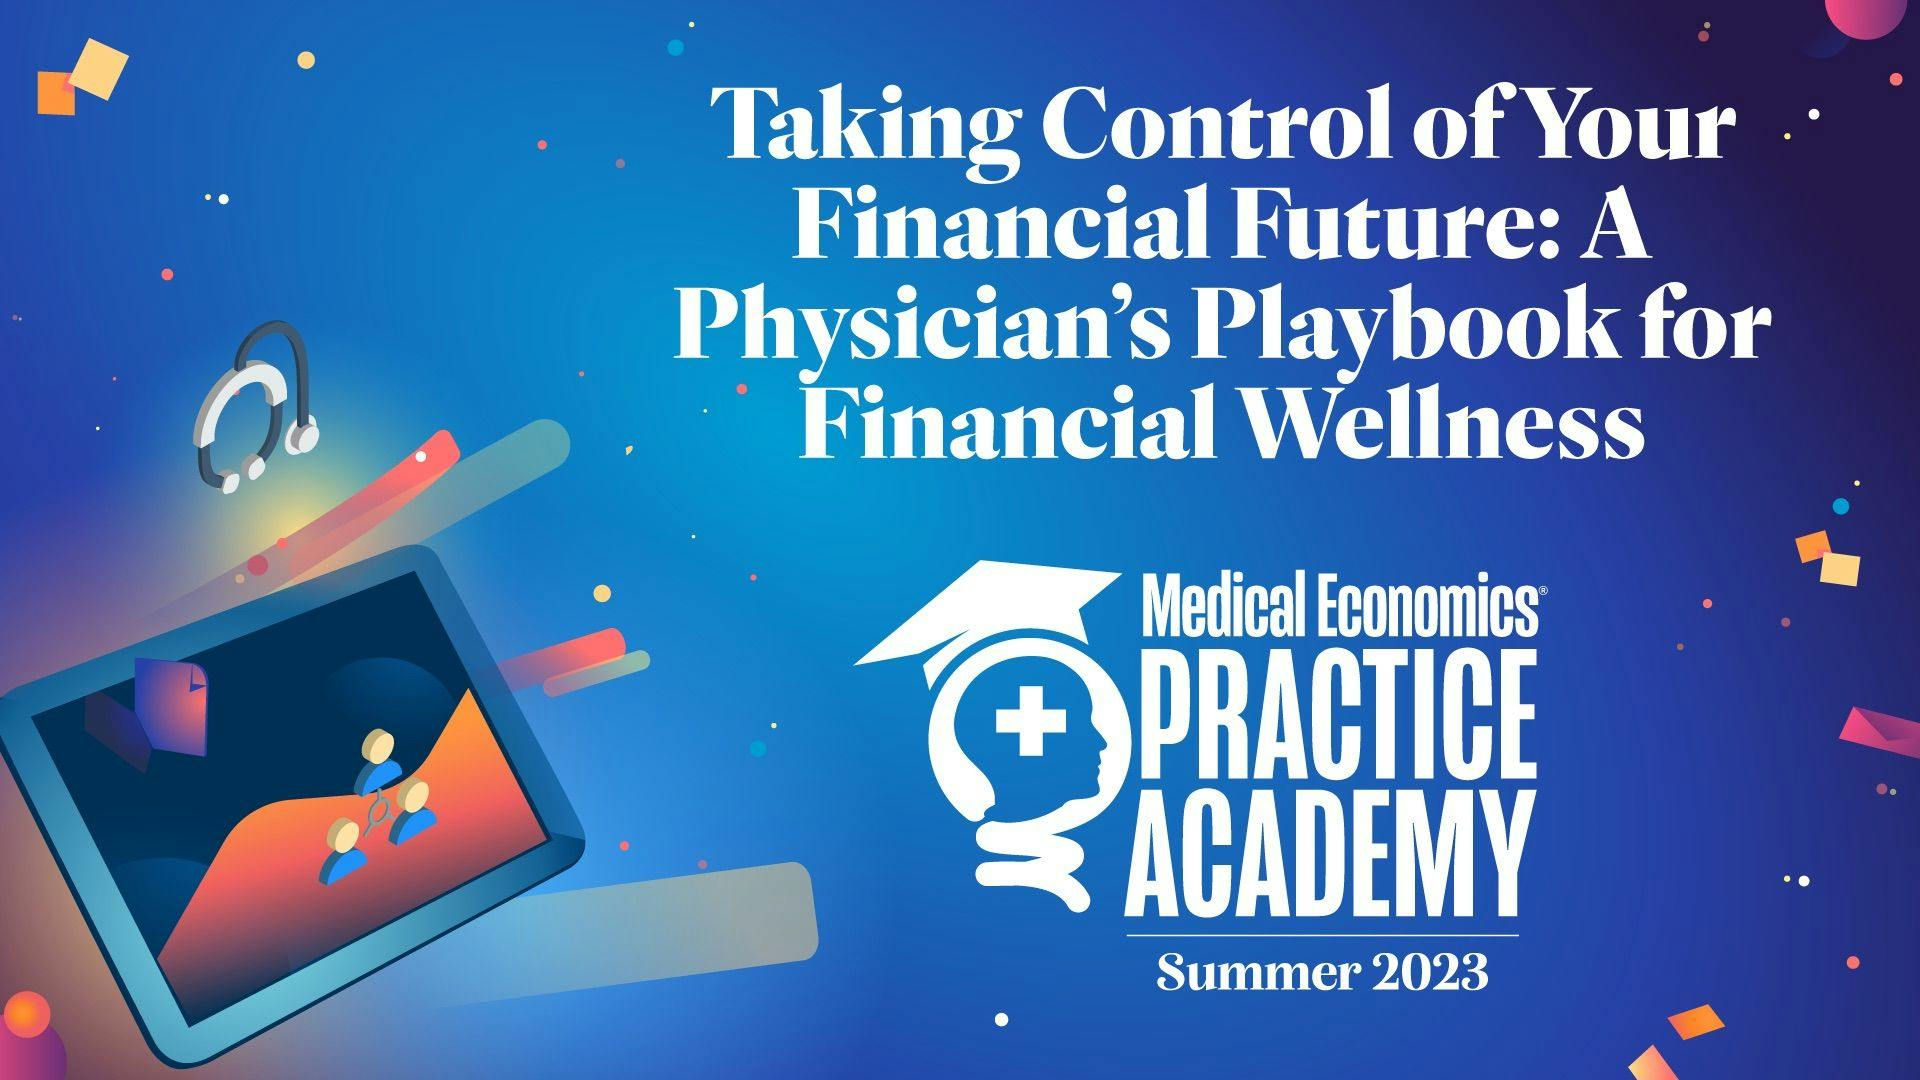 Taking Control of Your Financial Future: A Physician’s Playbook for Financial Wellness